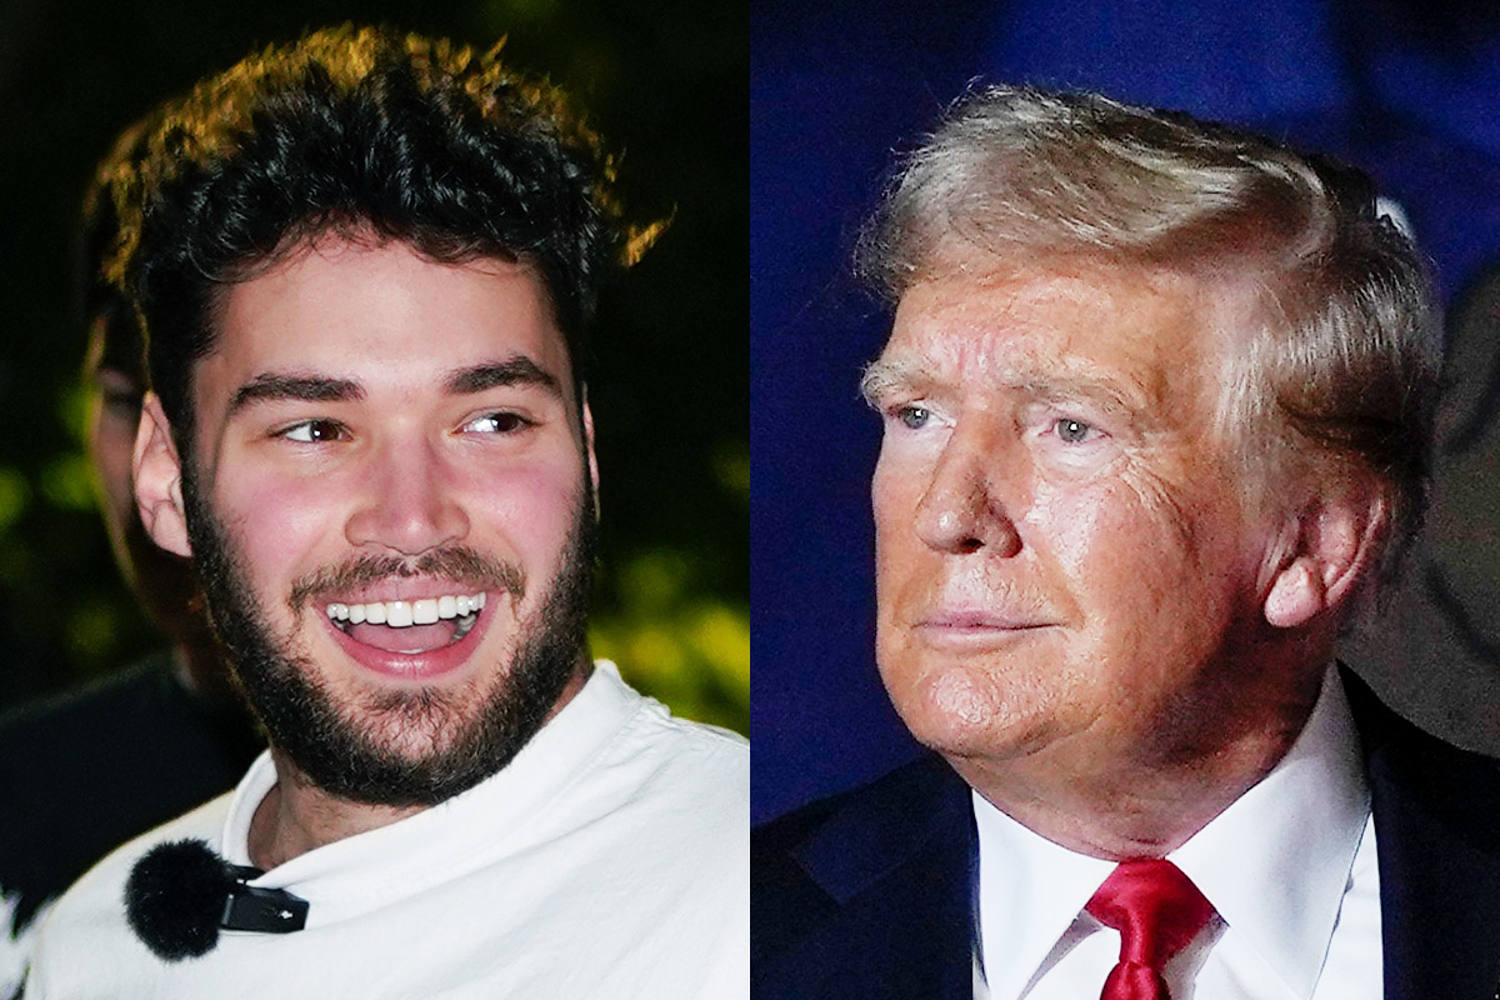 Trump was interviewed by a controversial livestreamer who gifted him a Cybertruck and a Rolex